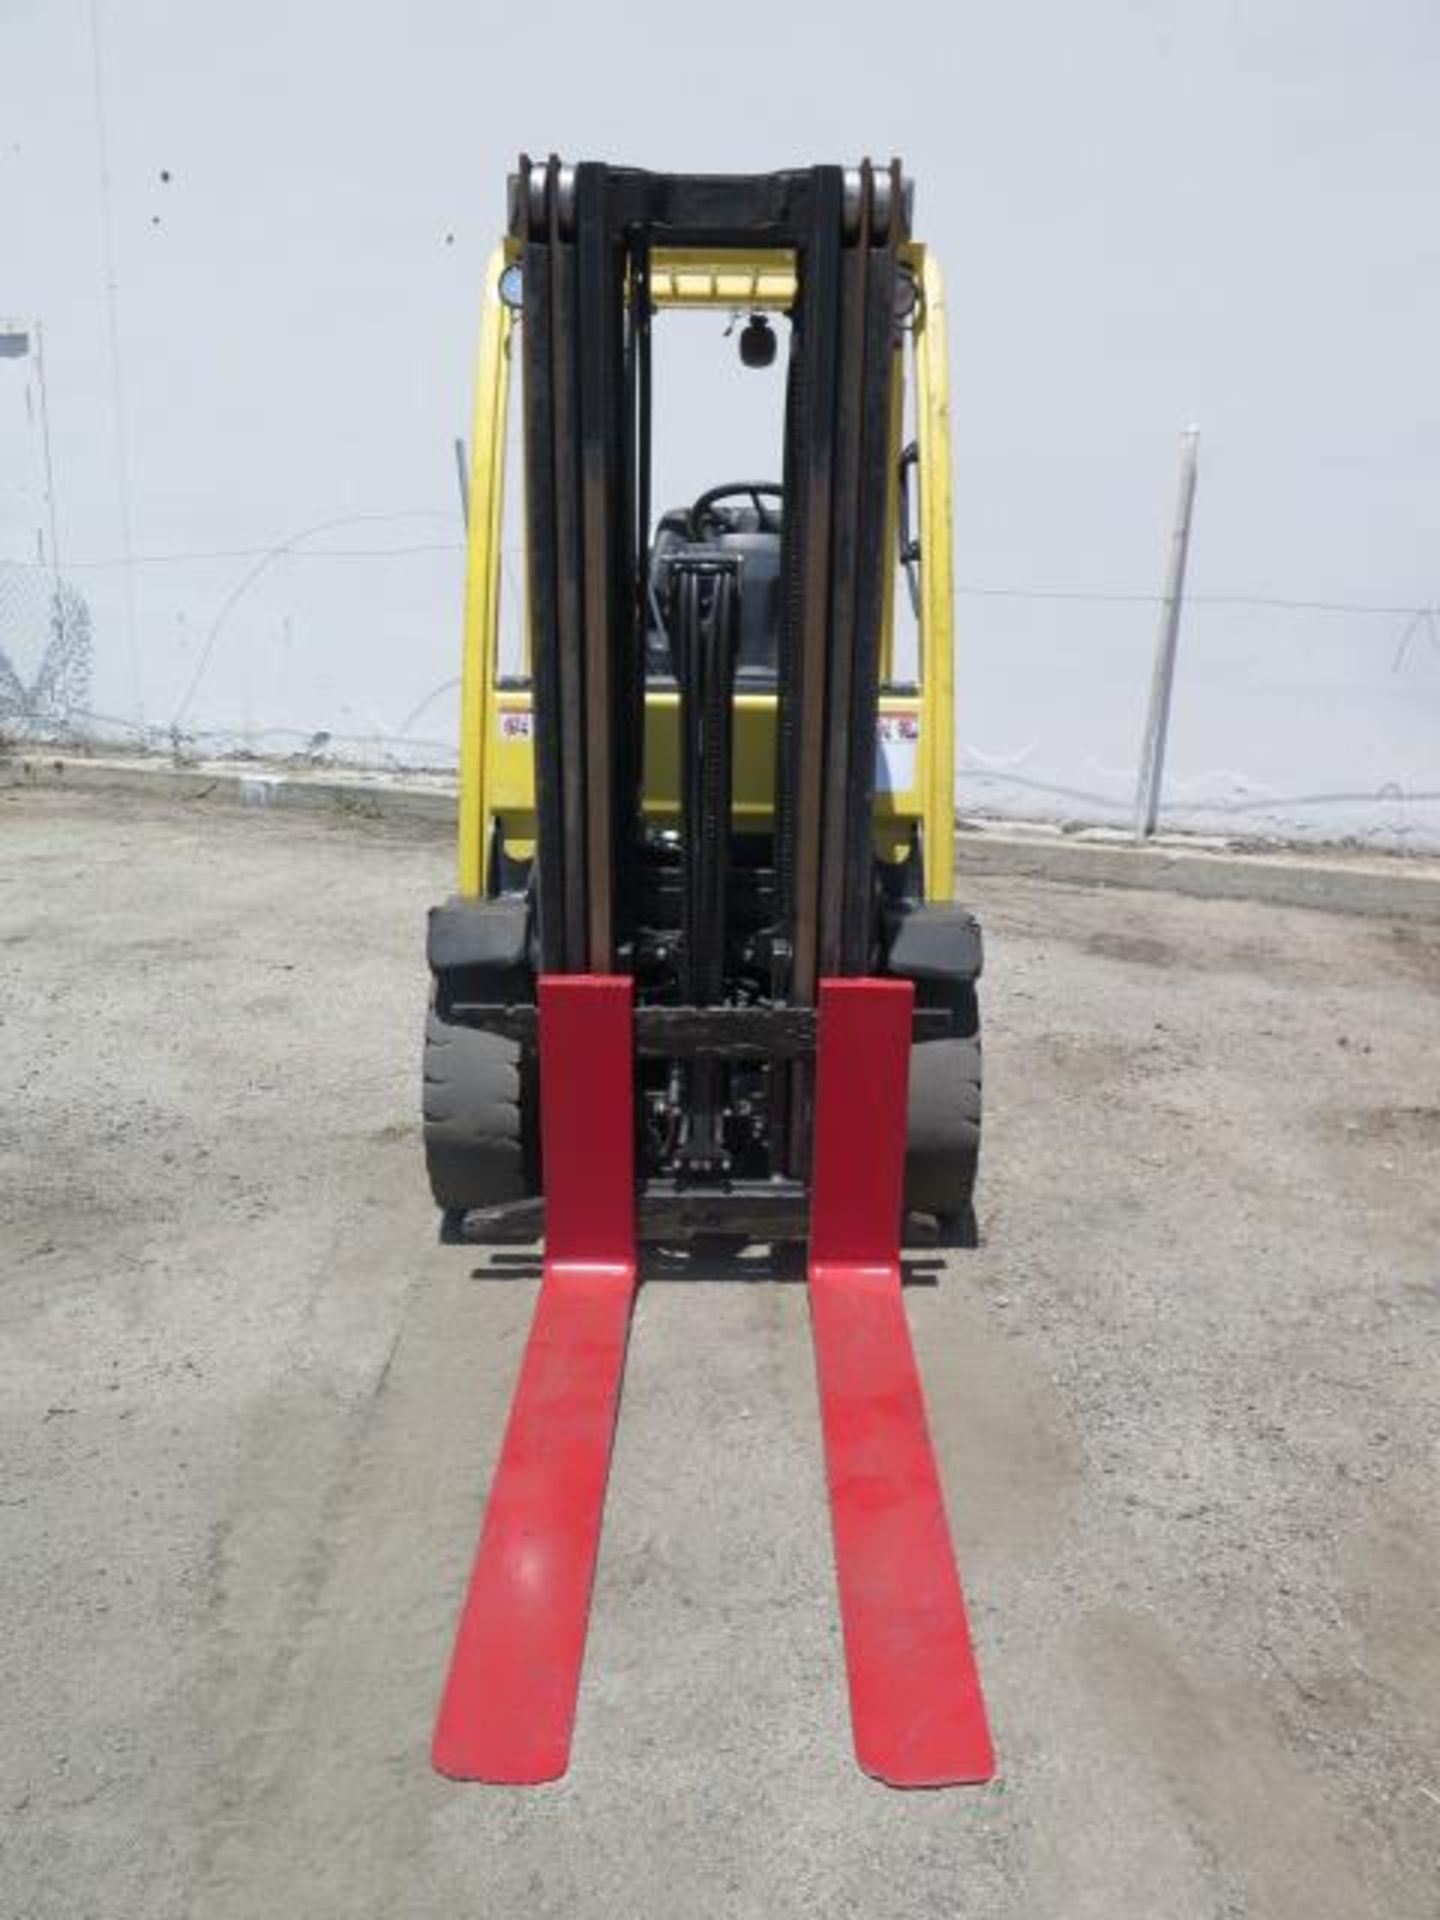 2018 Hyster H60FT 6000 Lb Cap LPG Forklift s/n P177V04957P w/ 3-Stage,182” Lift Height, SOLD AS IS - Image 2 of 21